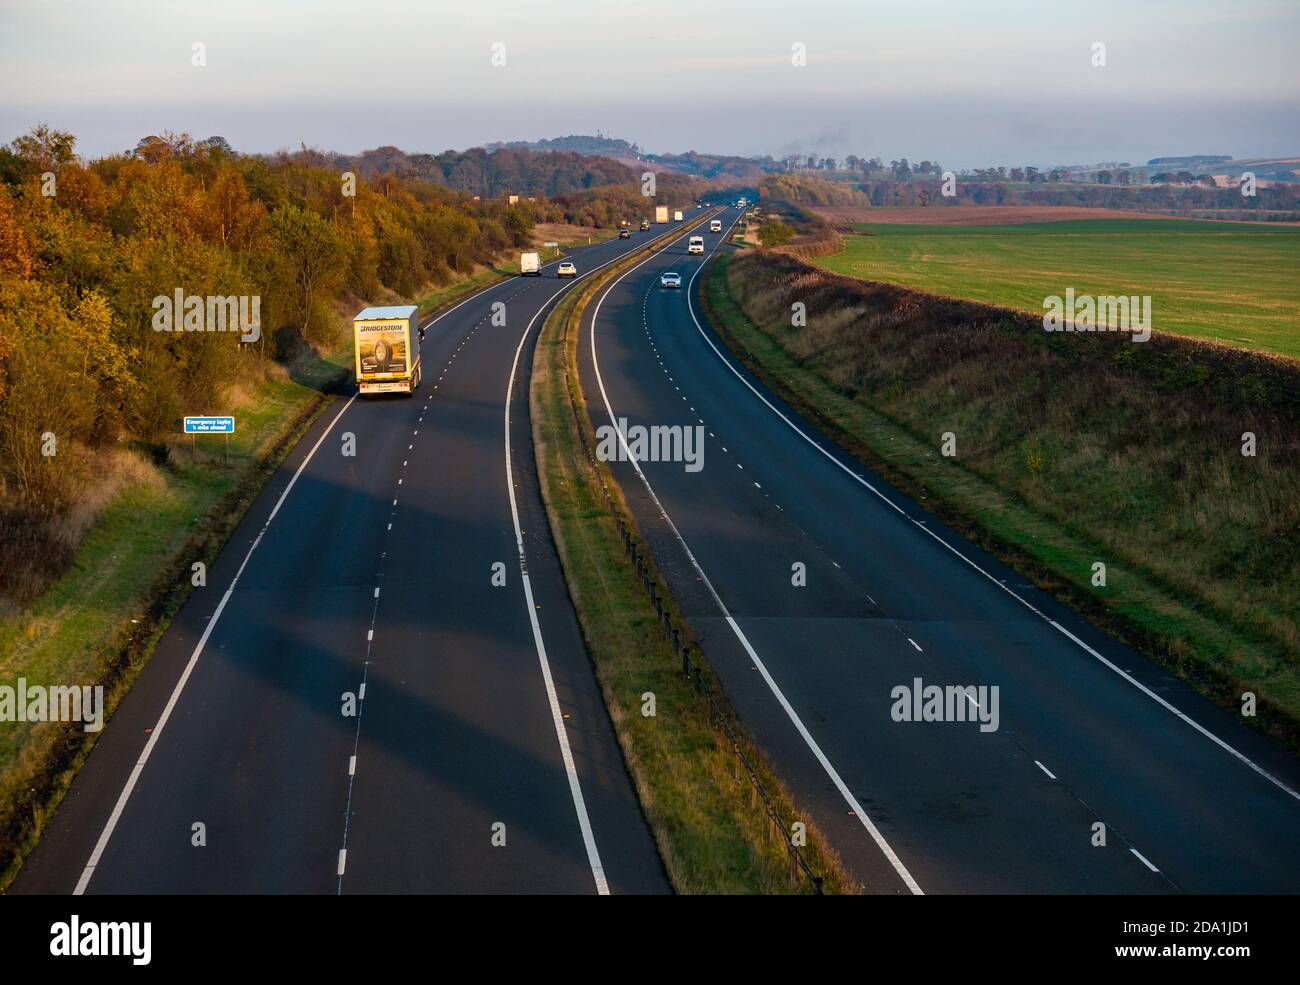 View of A1 dual carriageway at sunset with traffic, East Lothian, Scotland., UK Stock Photo